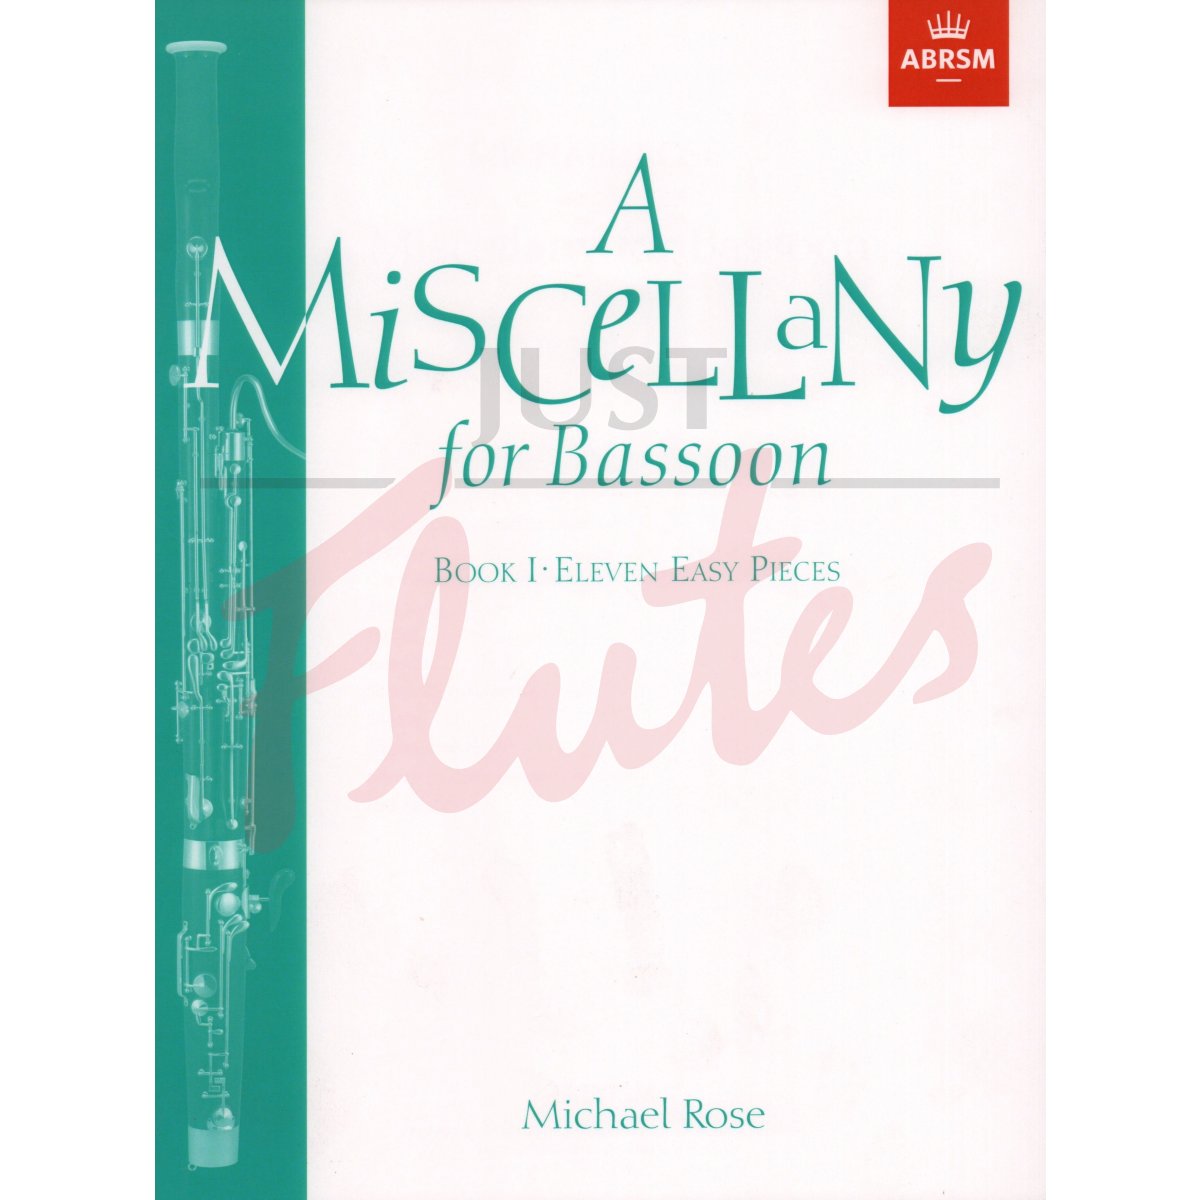 A Miscellany for Bassoon Book 1: Eleven Easy Pieces